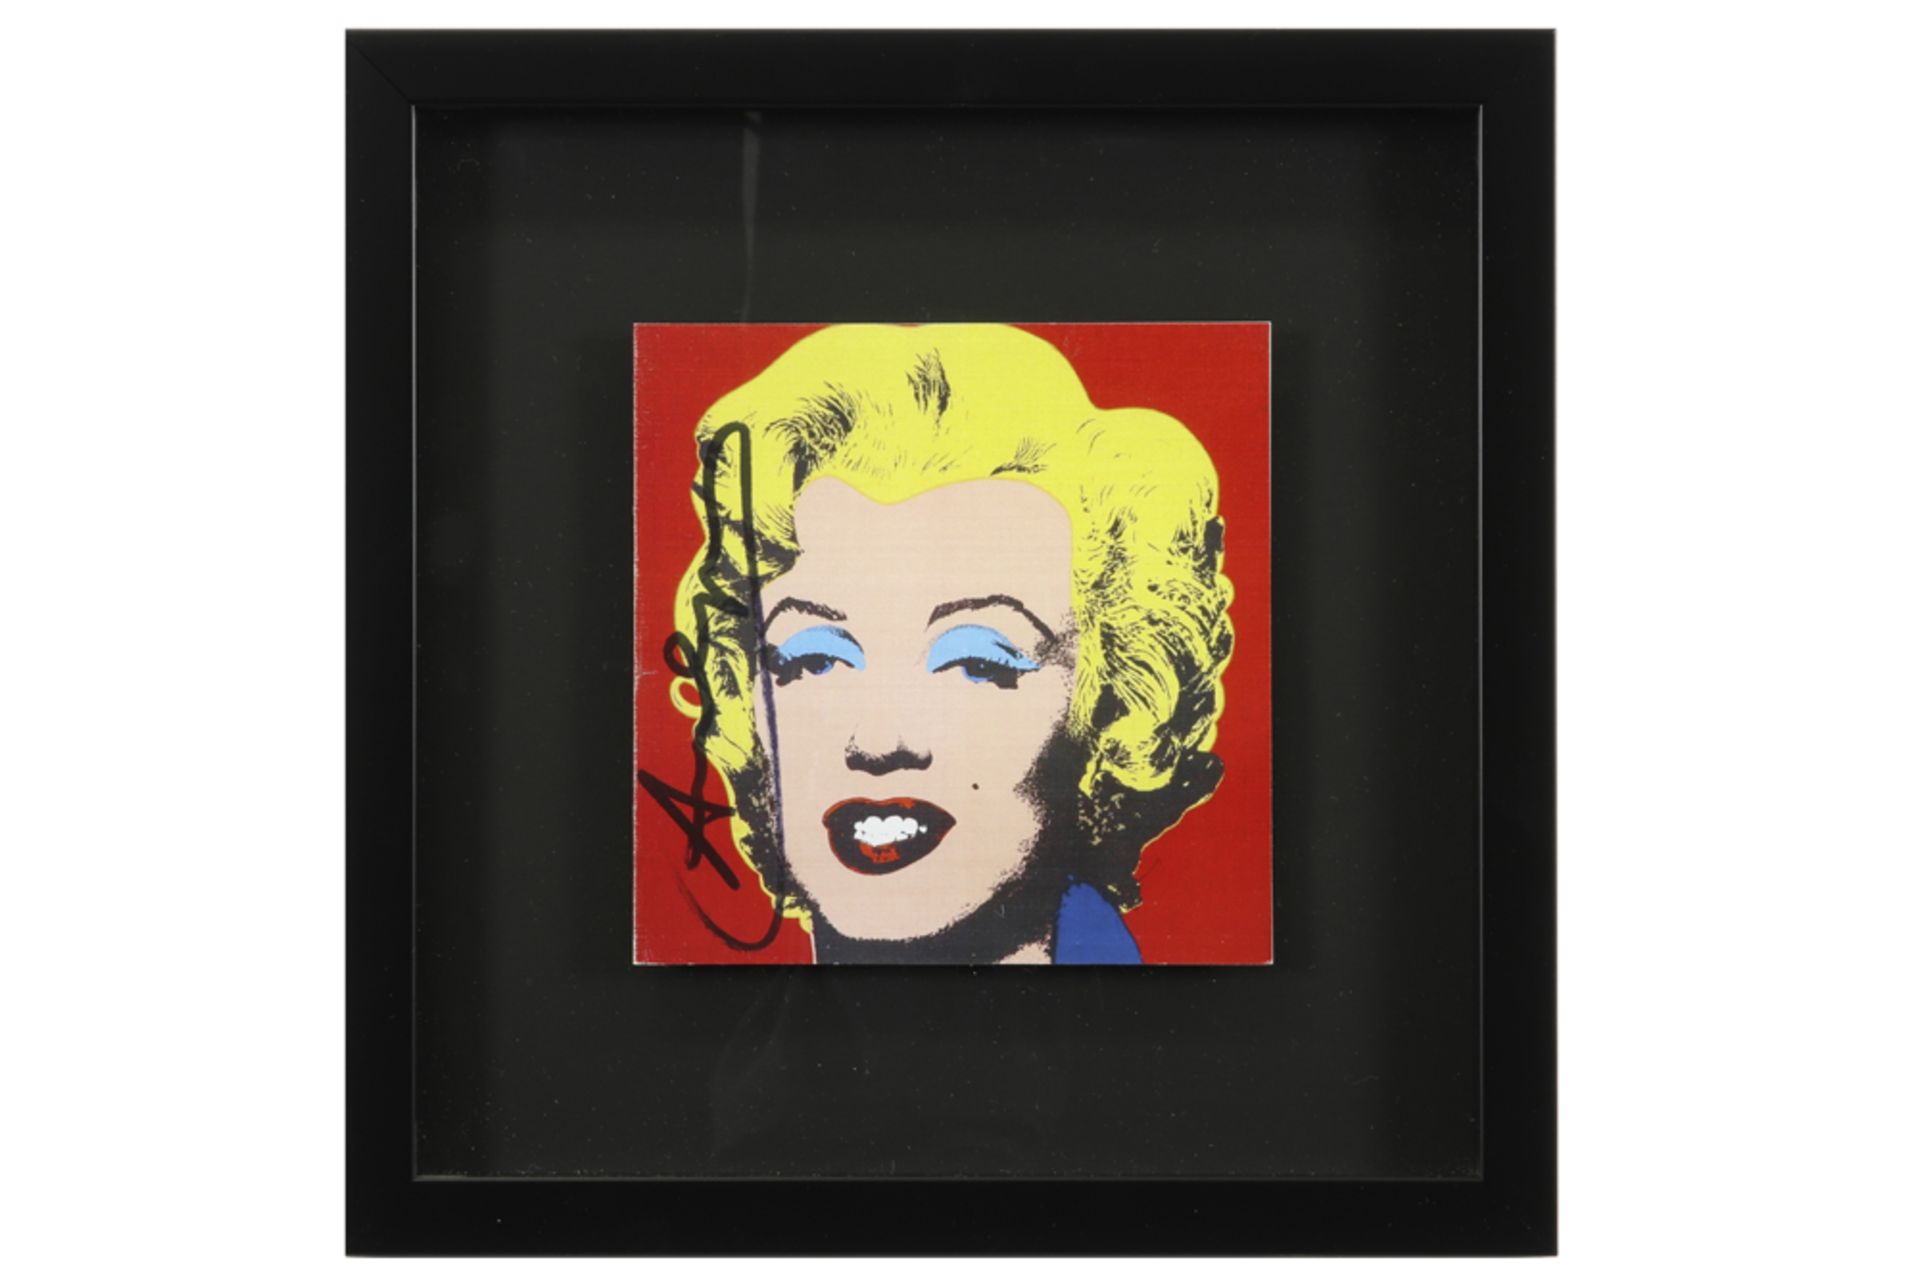 Andy Warhol signed "Marilyn" screenprint on an invitation by Leo Castelli for an exhibition dd - Image 2 of 2